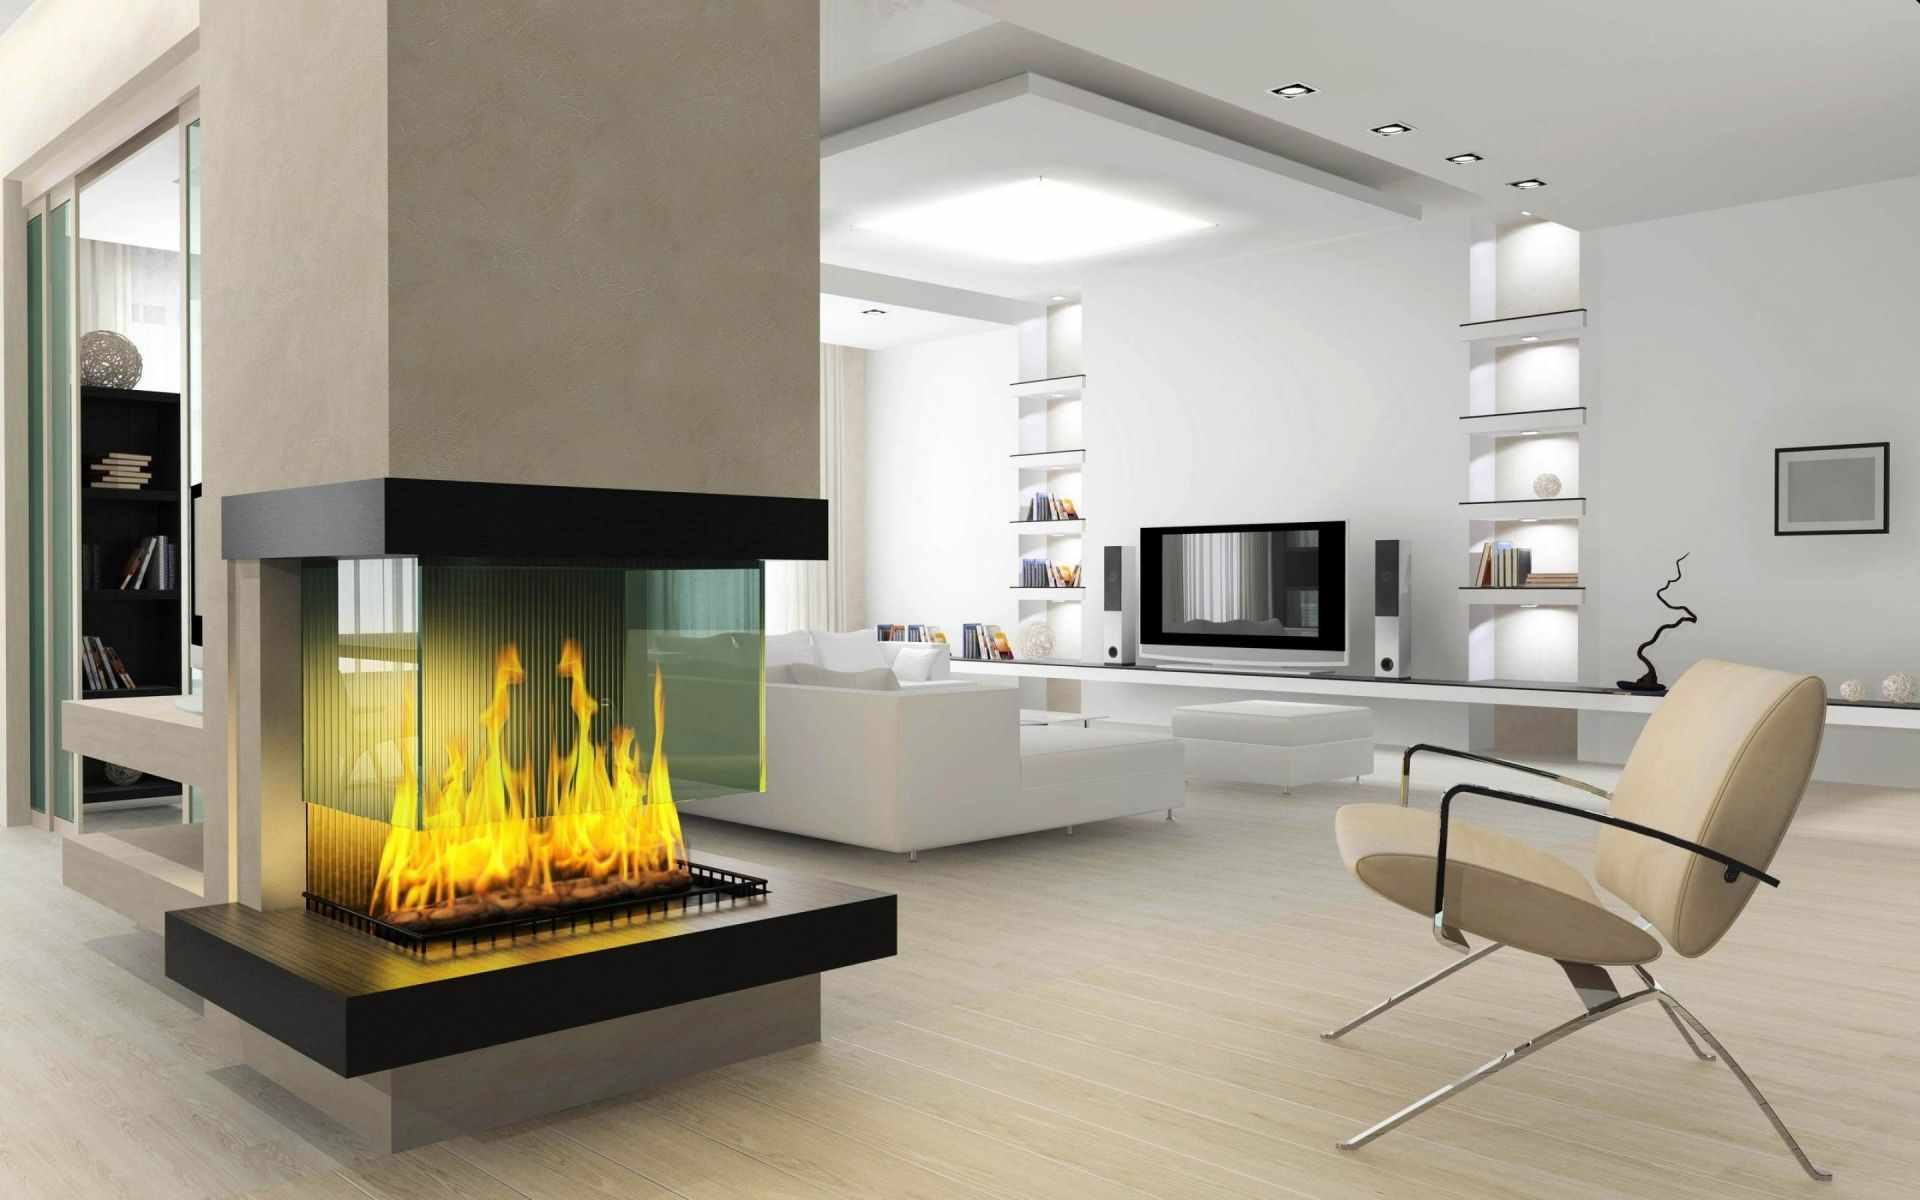 variant of using an unusual style of a living room with a fireplace